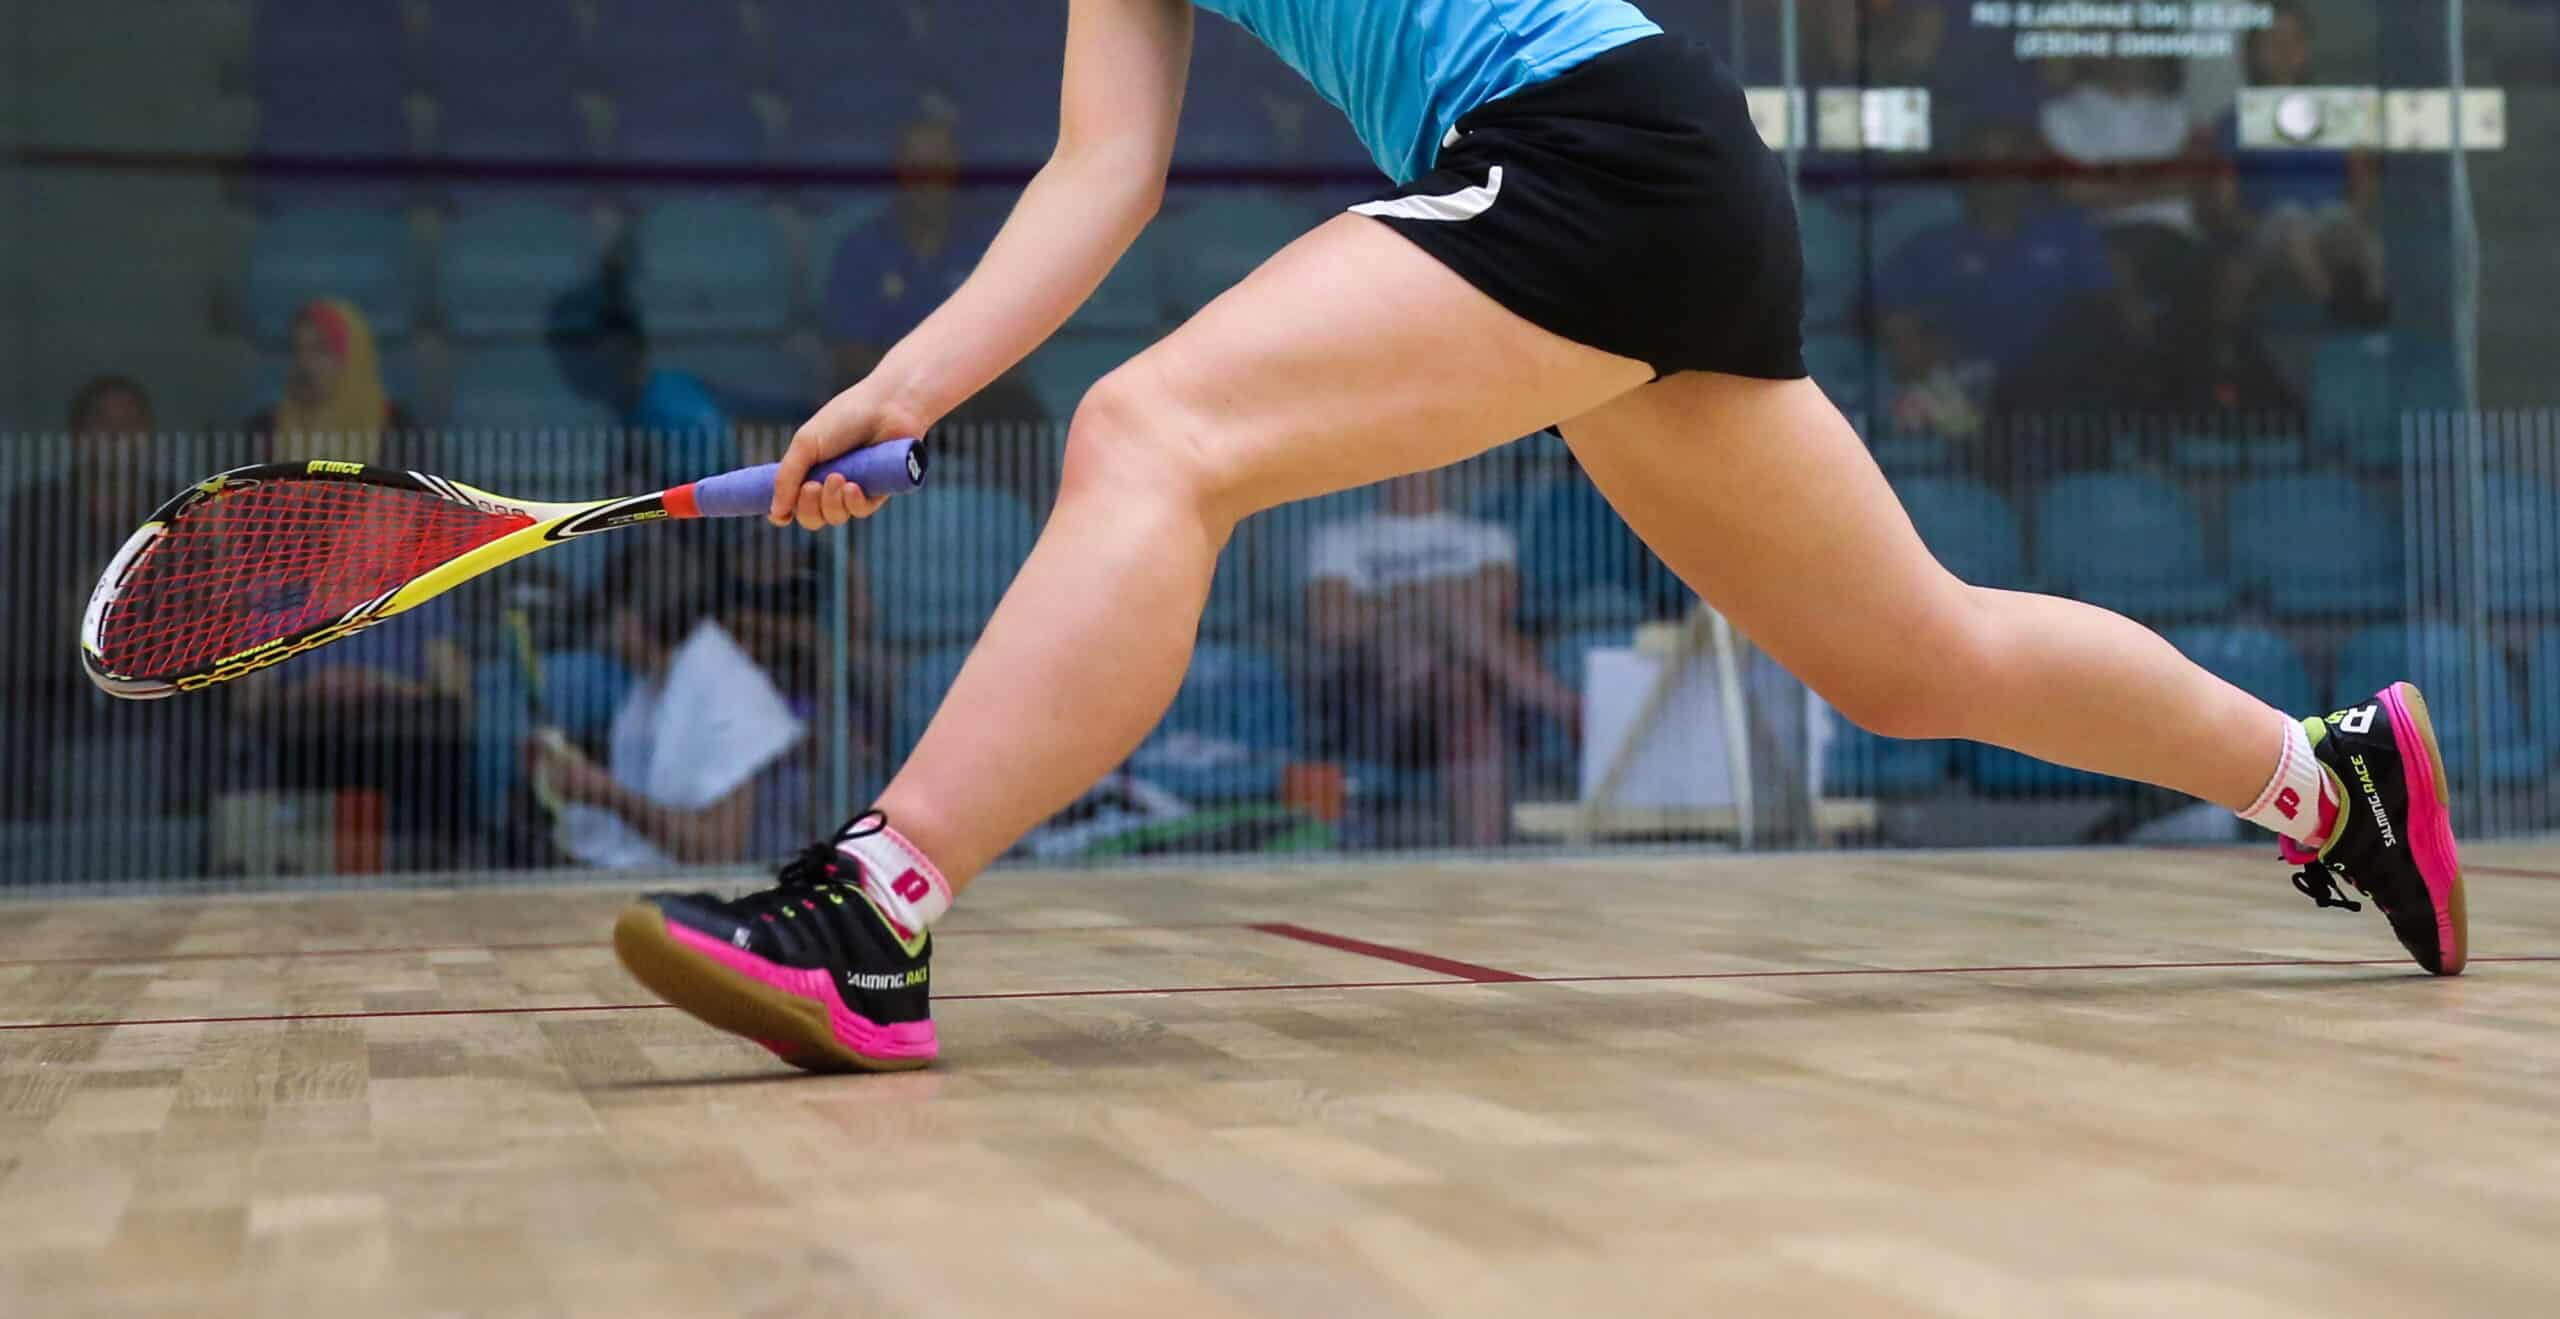 The Best Squash Shoes What to Look for When Choosing Squash Shoes